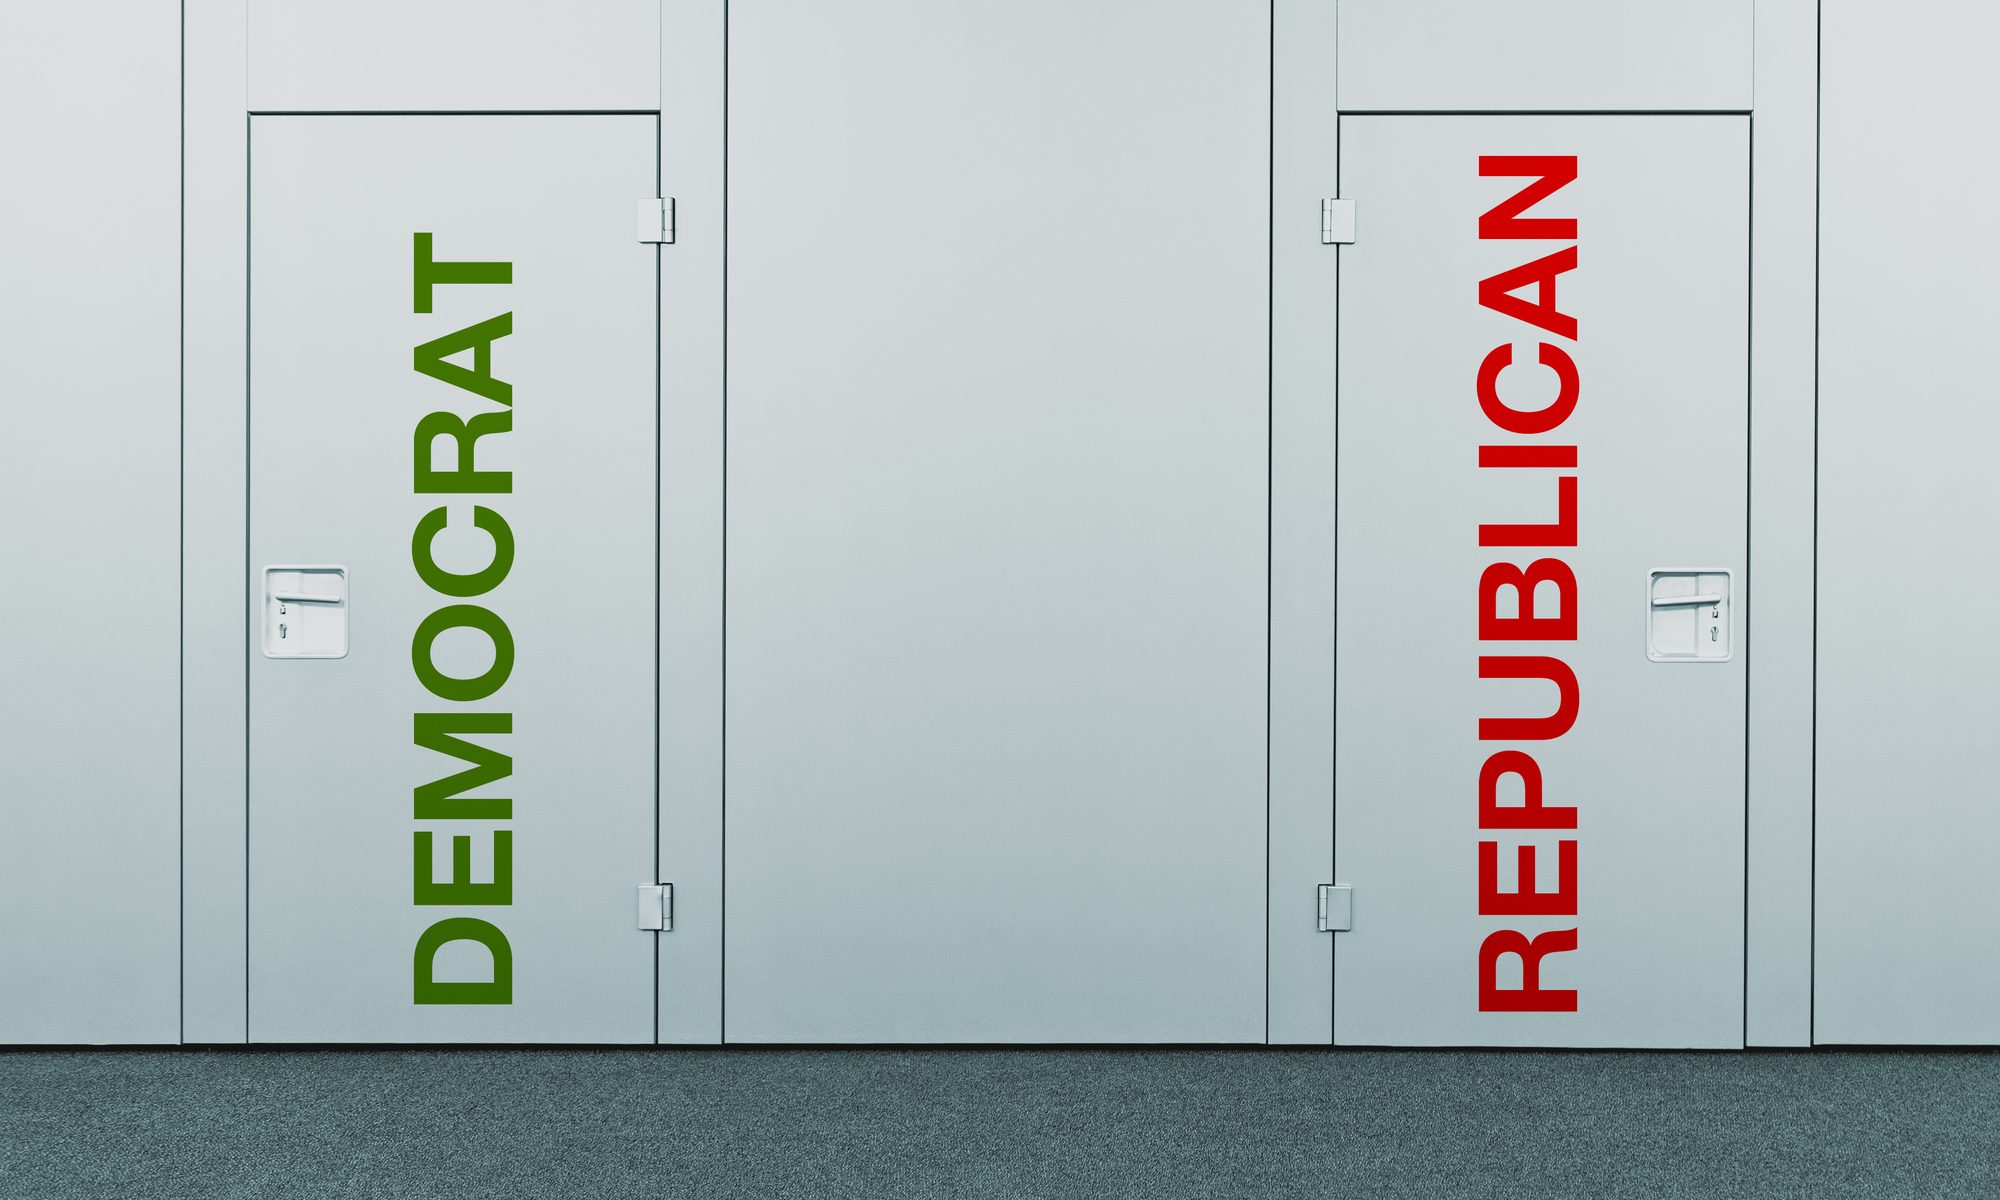 photograph of two closed doors labeled "Democrat" and "Republican"